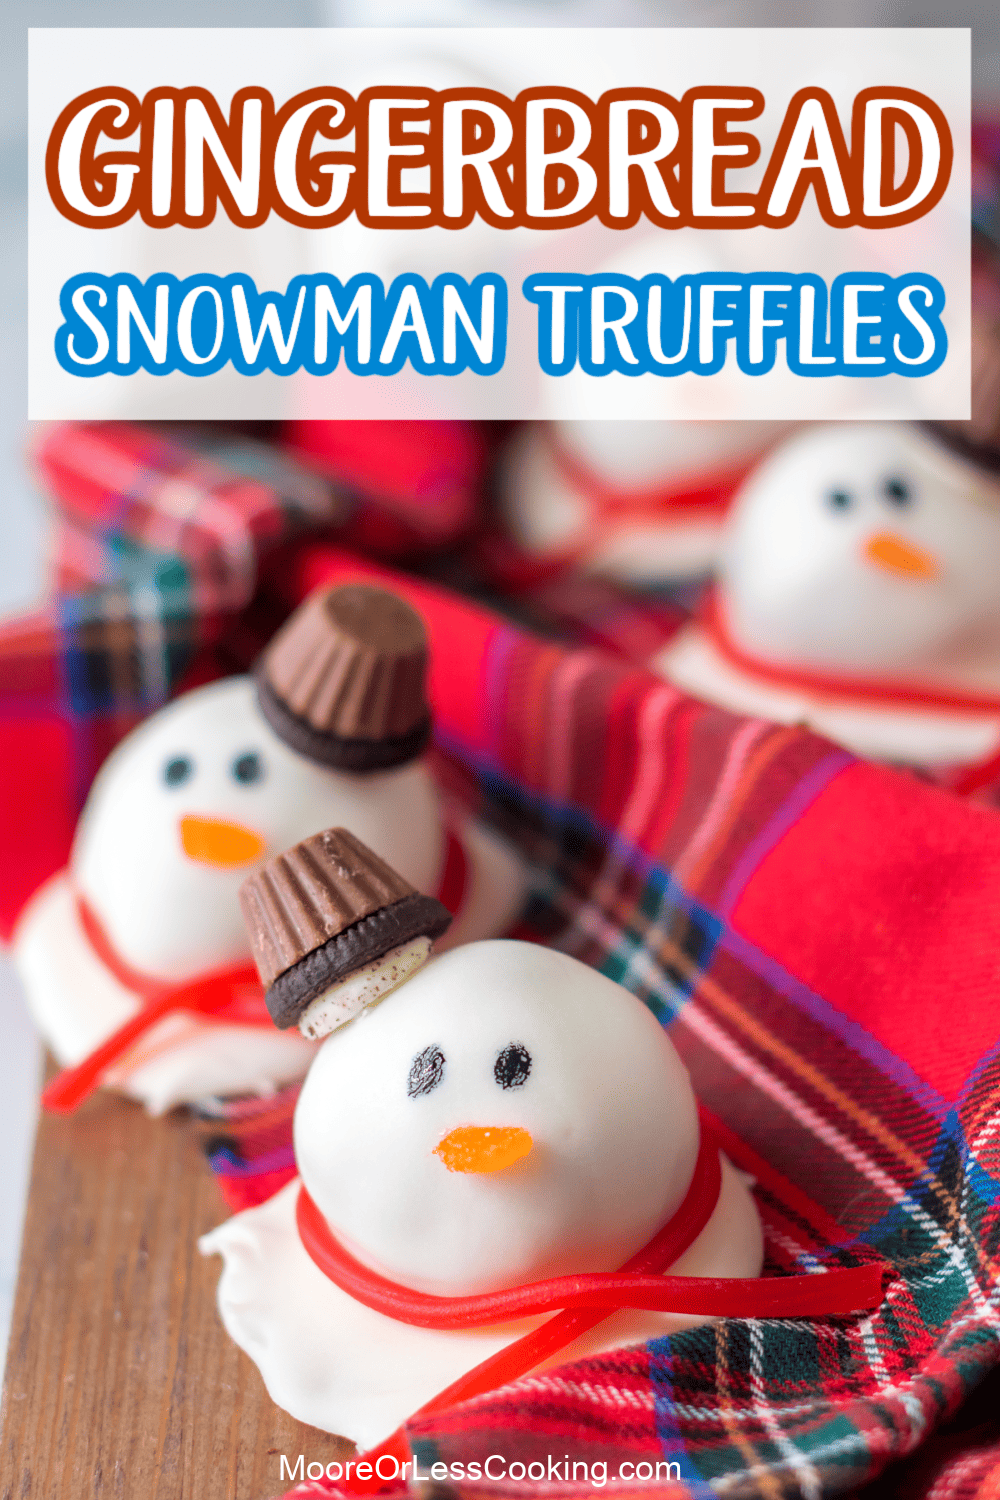 These Gingerbread Snowman Truffles are filled with cozy ginger, cinnamon and molasses flavor and coated in snowy white chocolate. These easy bite-sized cookie balls are a no bake melt-in-your-mouth treat that's perfect for the winter holidays. via @Mooreorlesscook